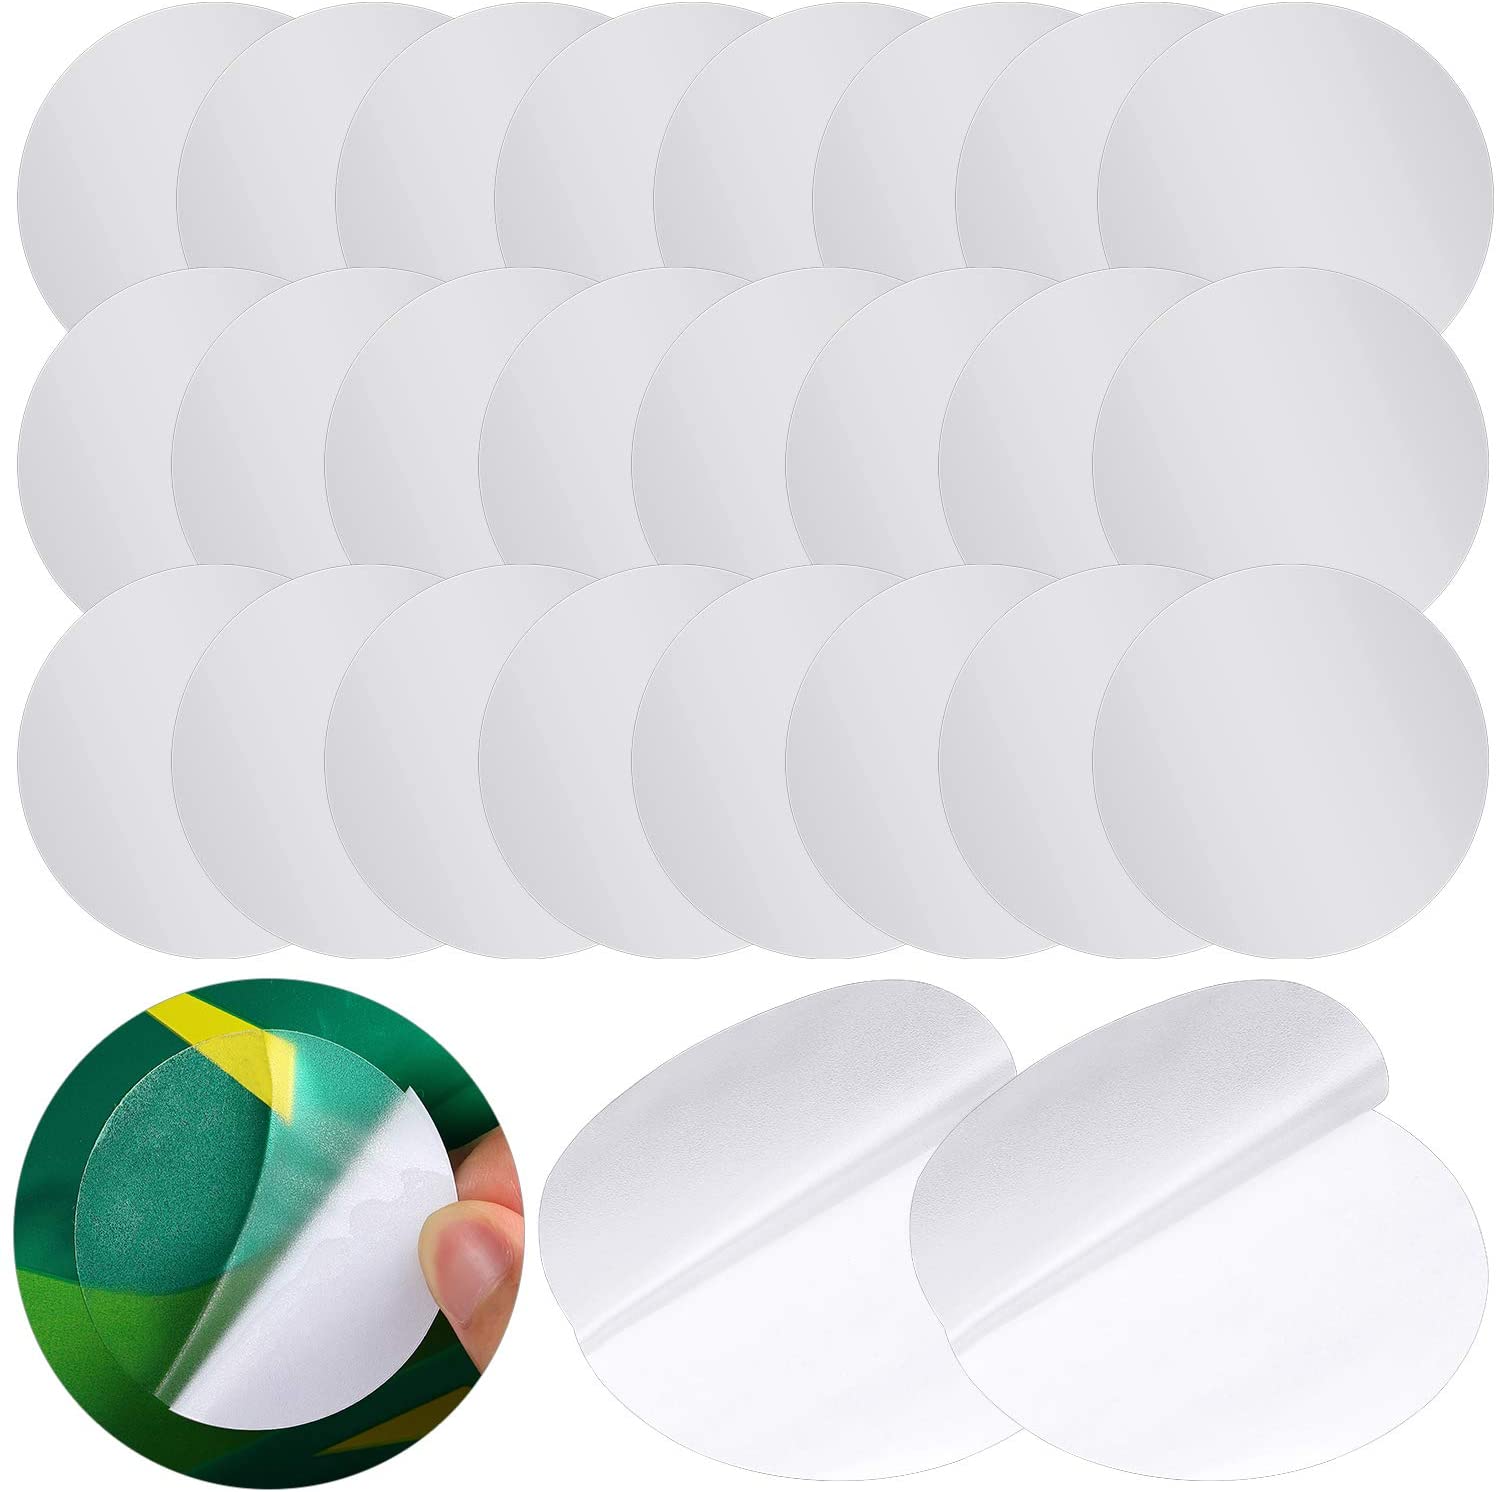 Outus PVC Adhesive Back Inflatables Patches, 30-Piece